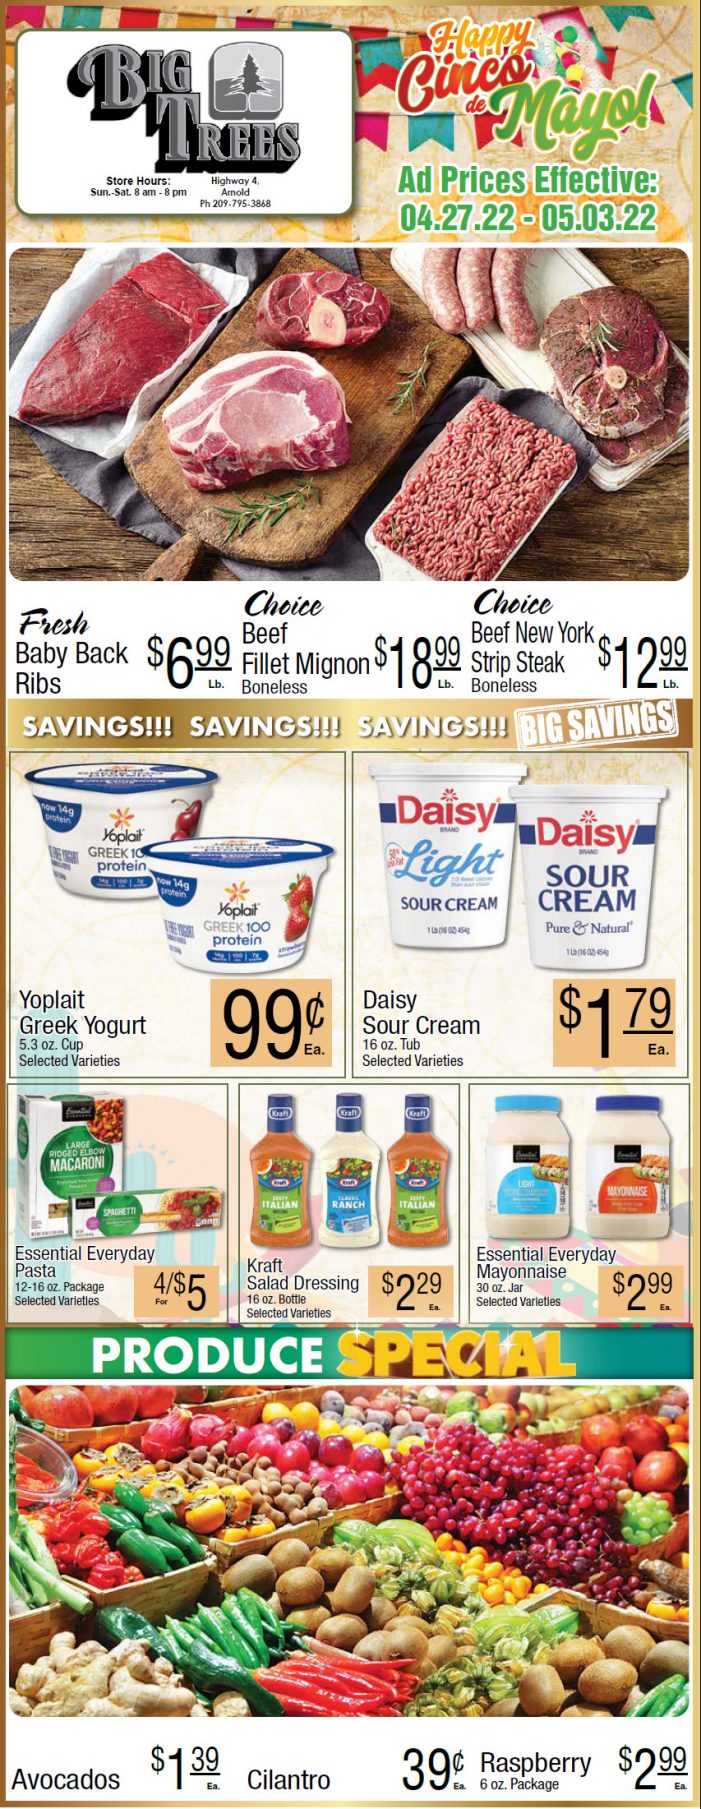 Big Trees Market Weekly Ad & Grocery Specials April 27th Through May 3rd! Shop Local & Save!